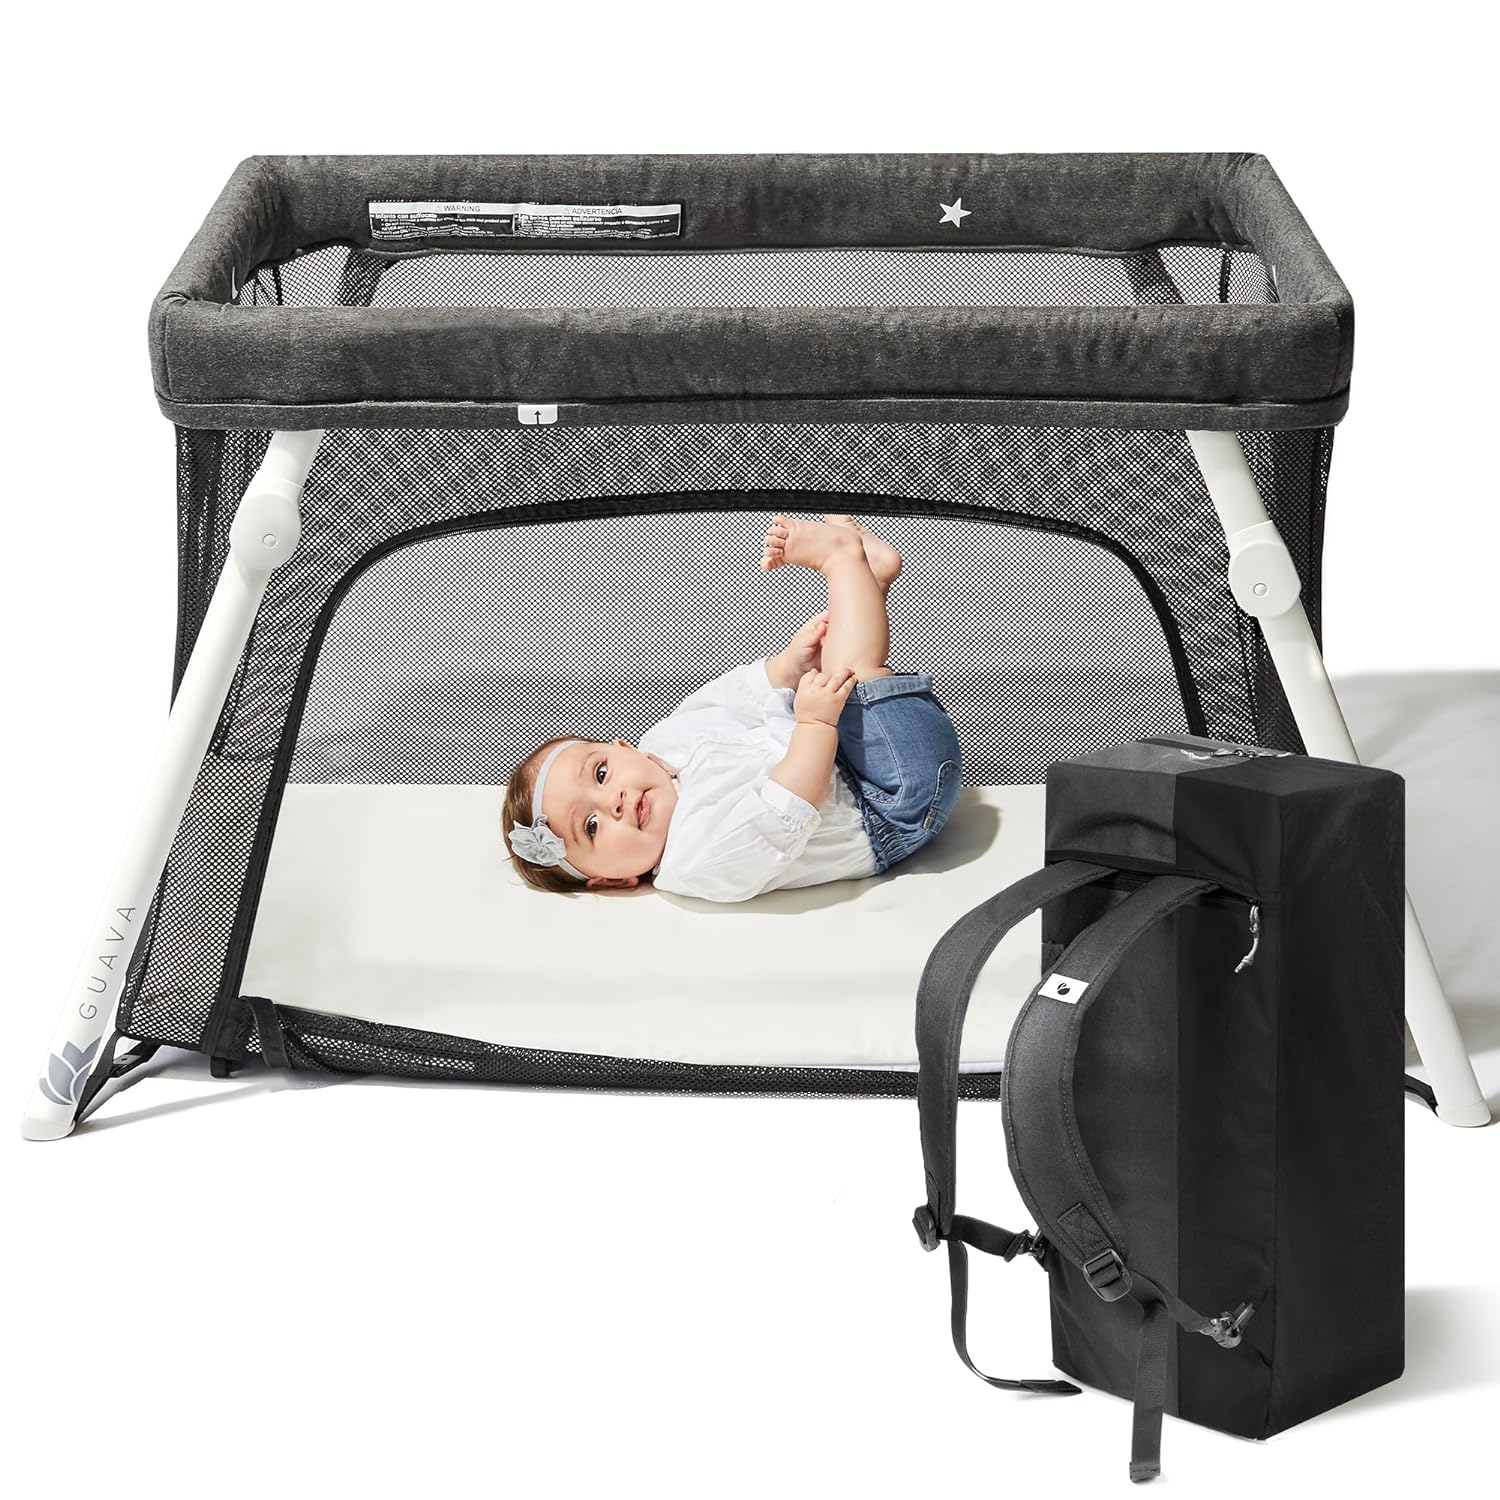 Guava Lotus Travel Crib with Lightweight Backpack Design 2171000D *OPEN BOX* (8143007416558)